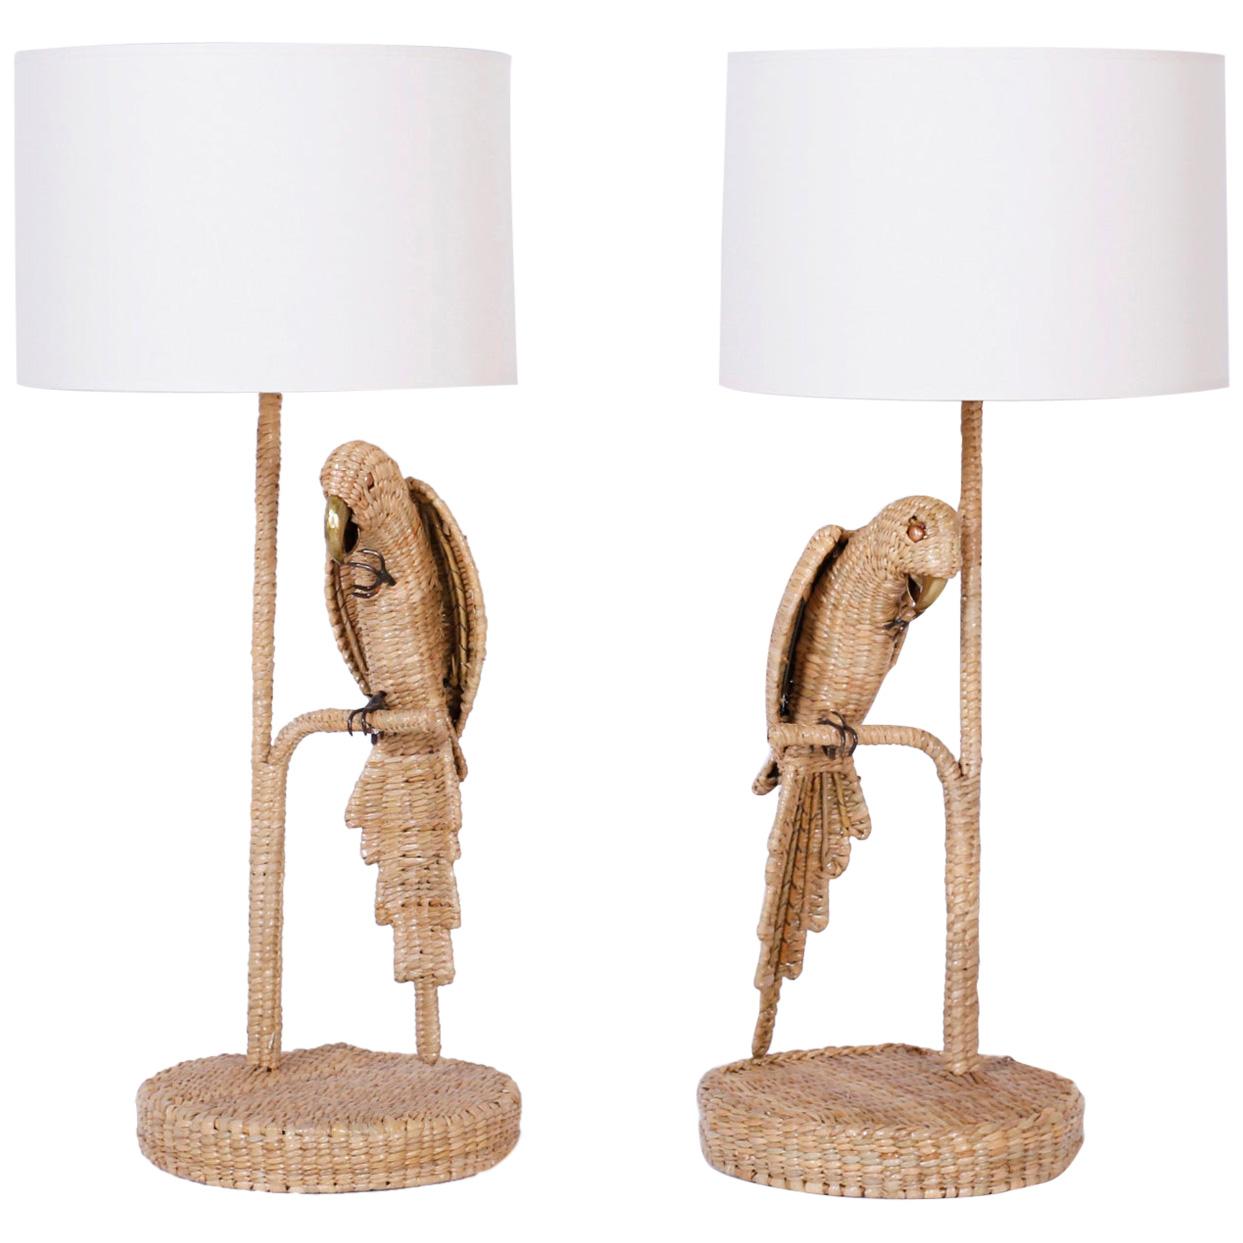 Pair of Mario Torres Wicker Parrot Table Lamps with Wicker or Linen Shades